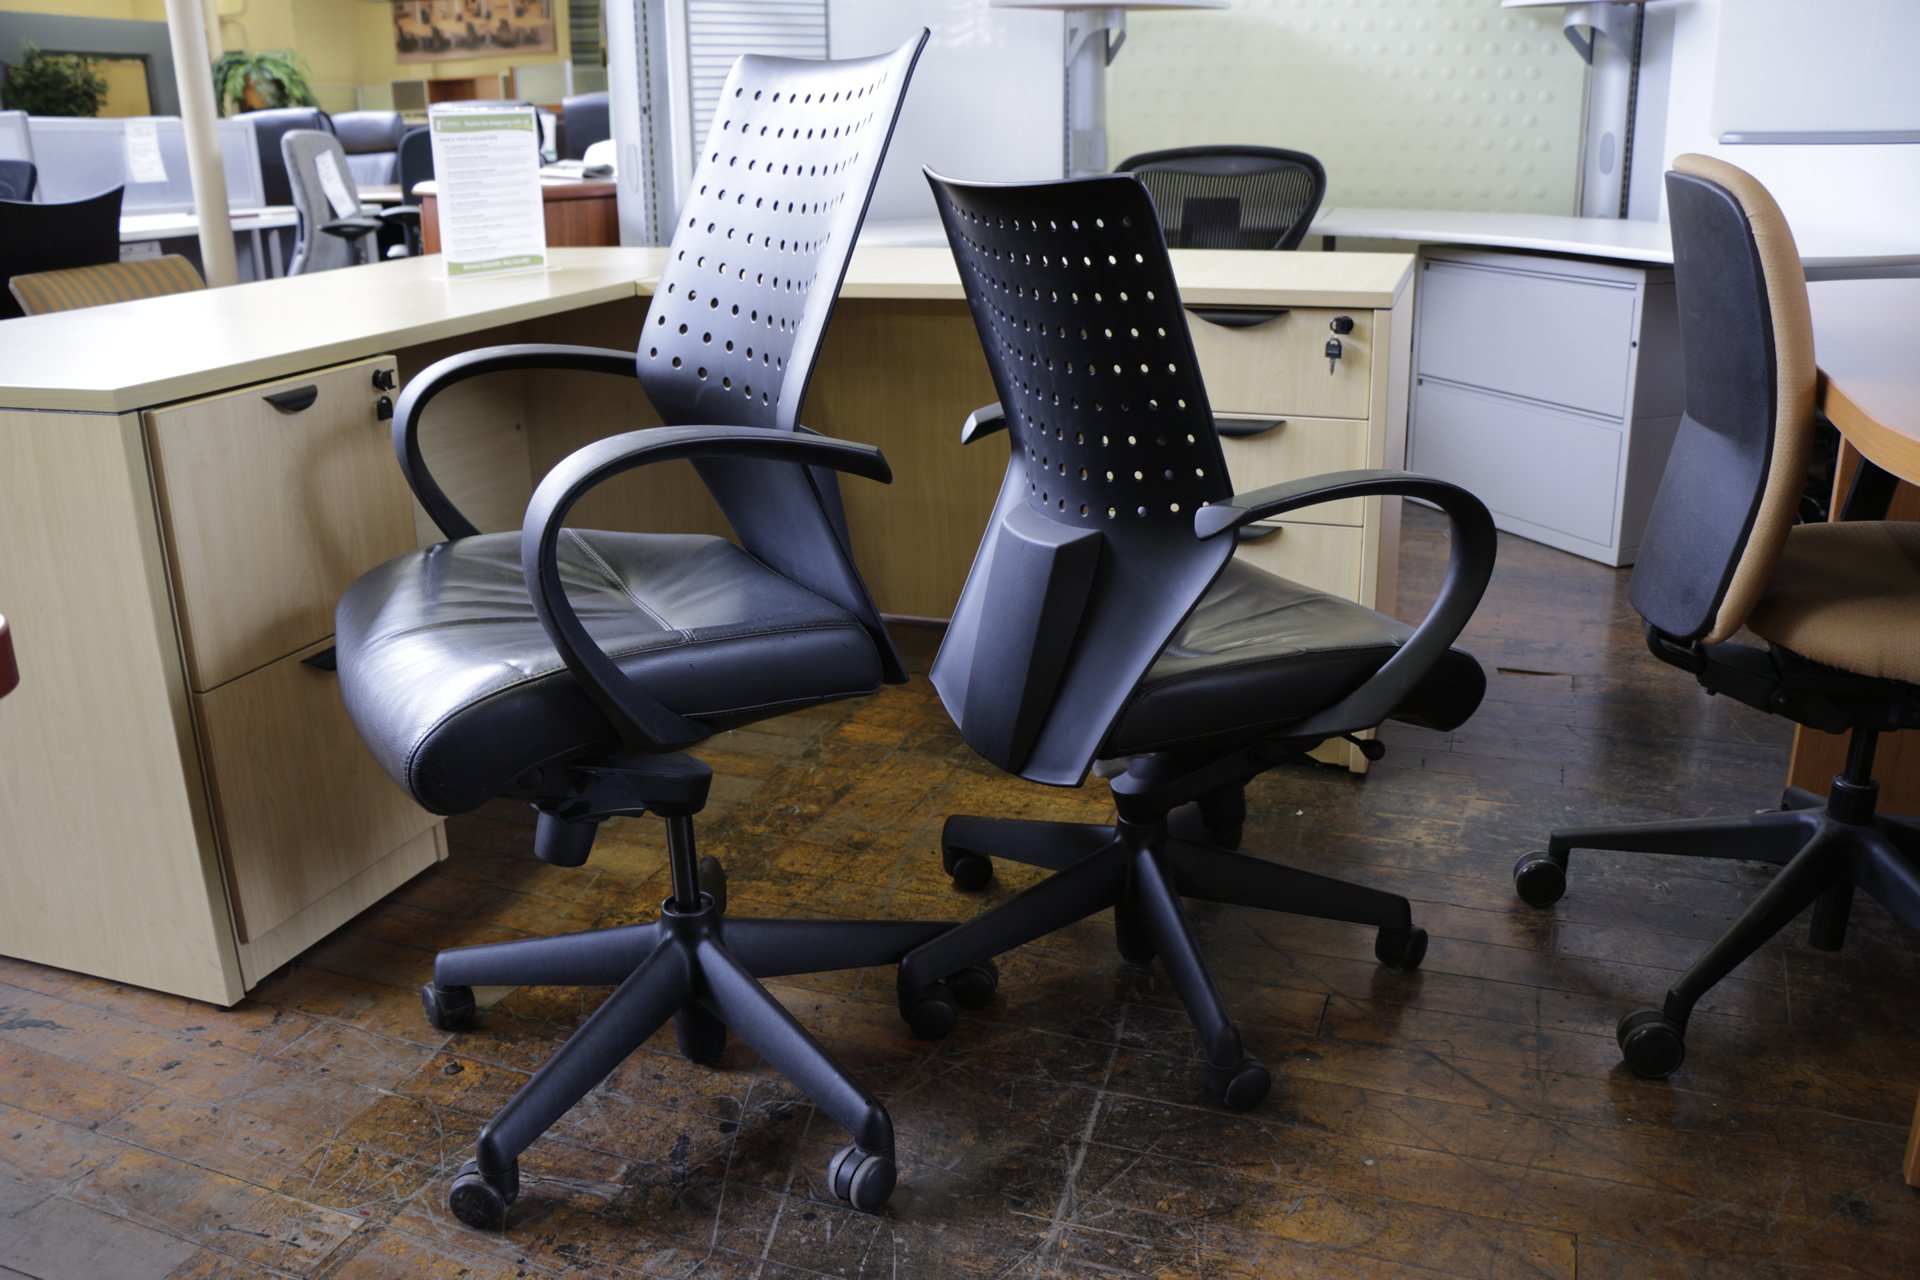 Keilhauer ‘Tom’ Mid-Back Chairs with Black Leather Seats